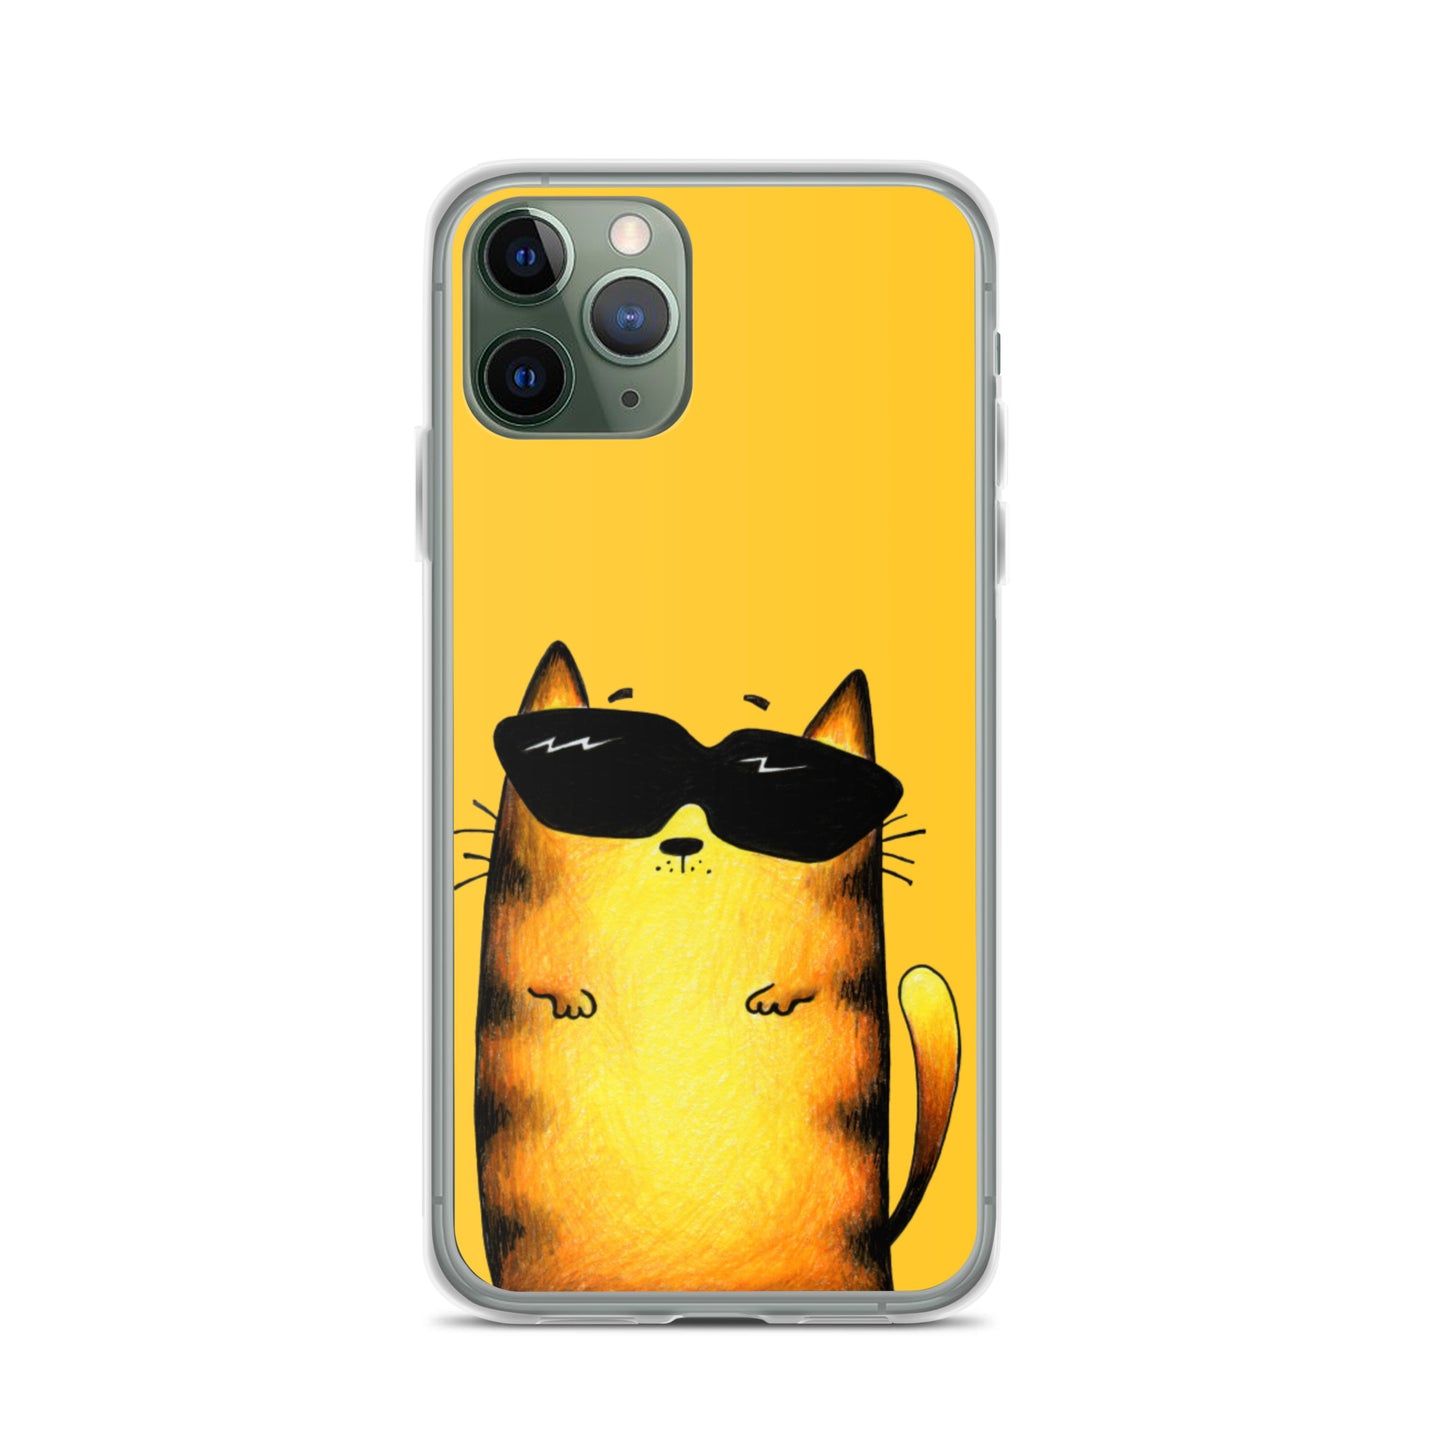 flexible yellow iphone 11 pro case with cat print